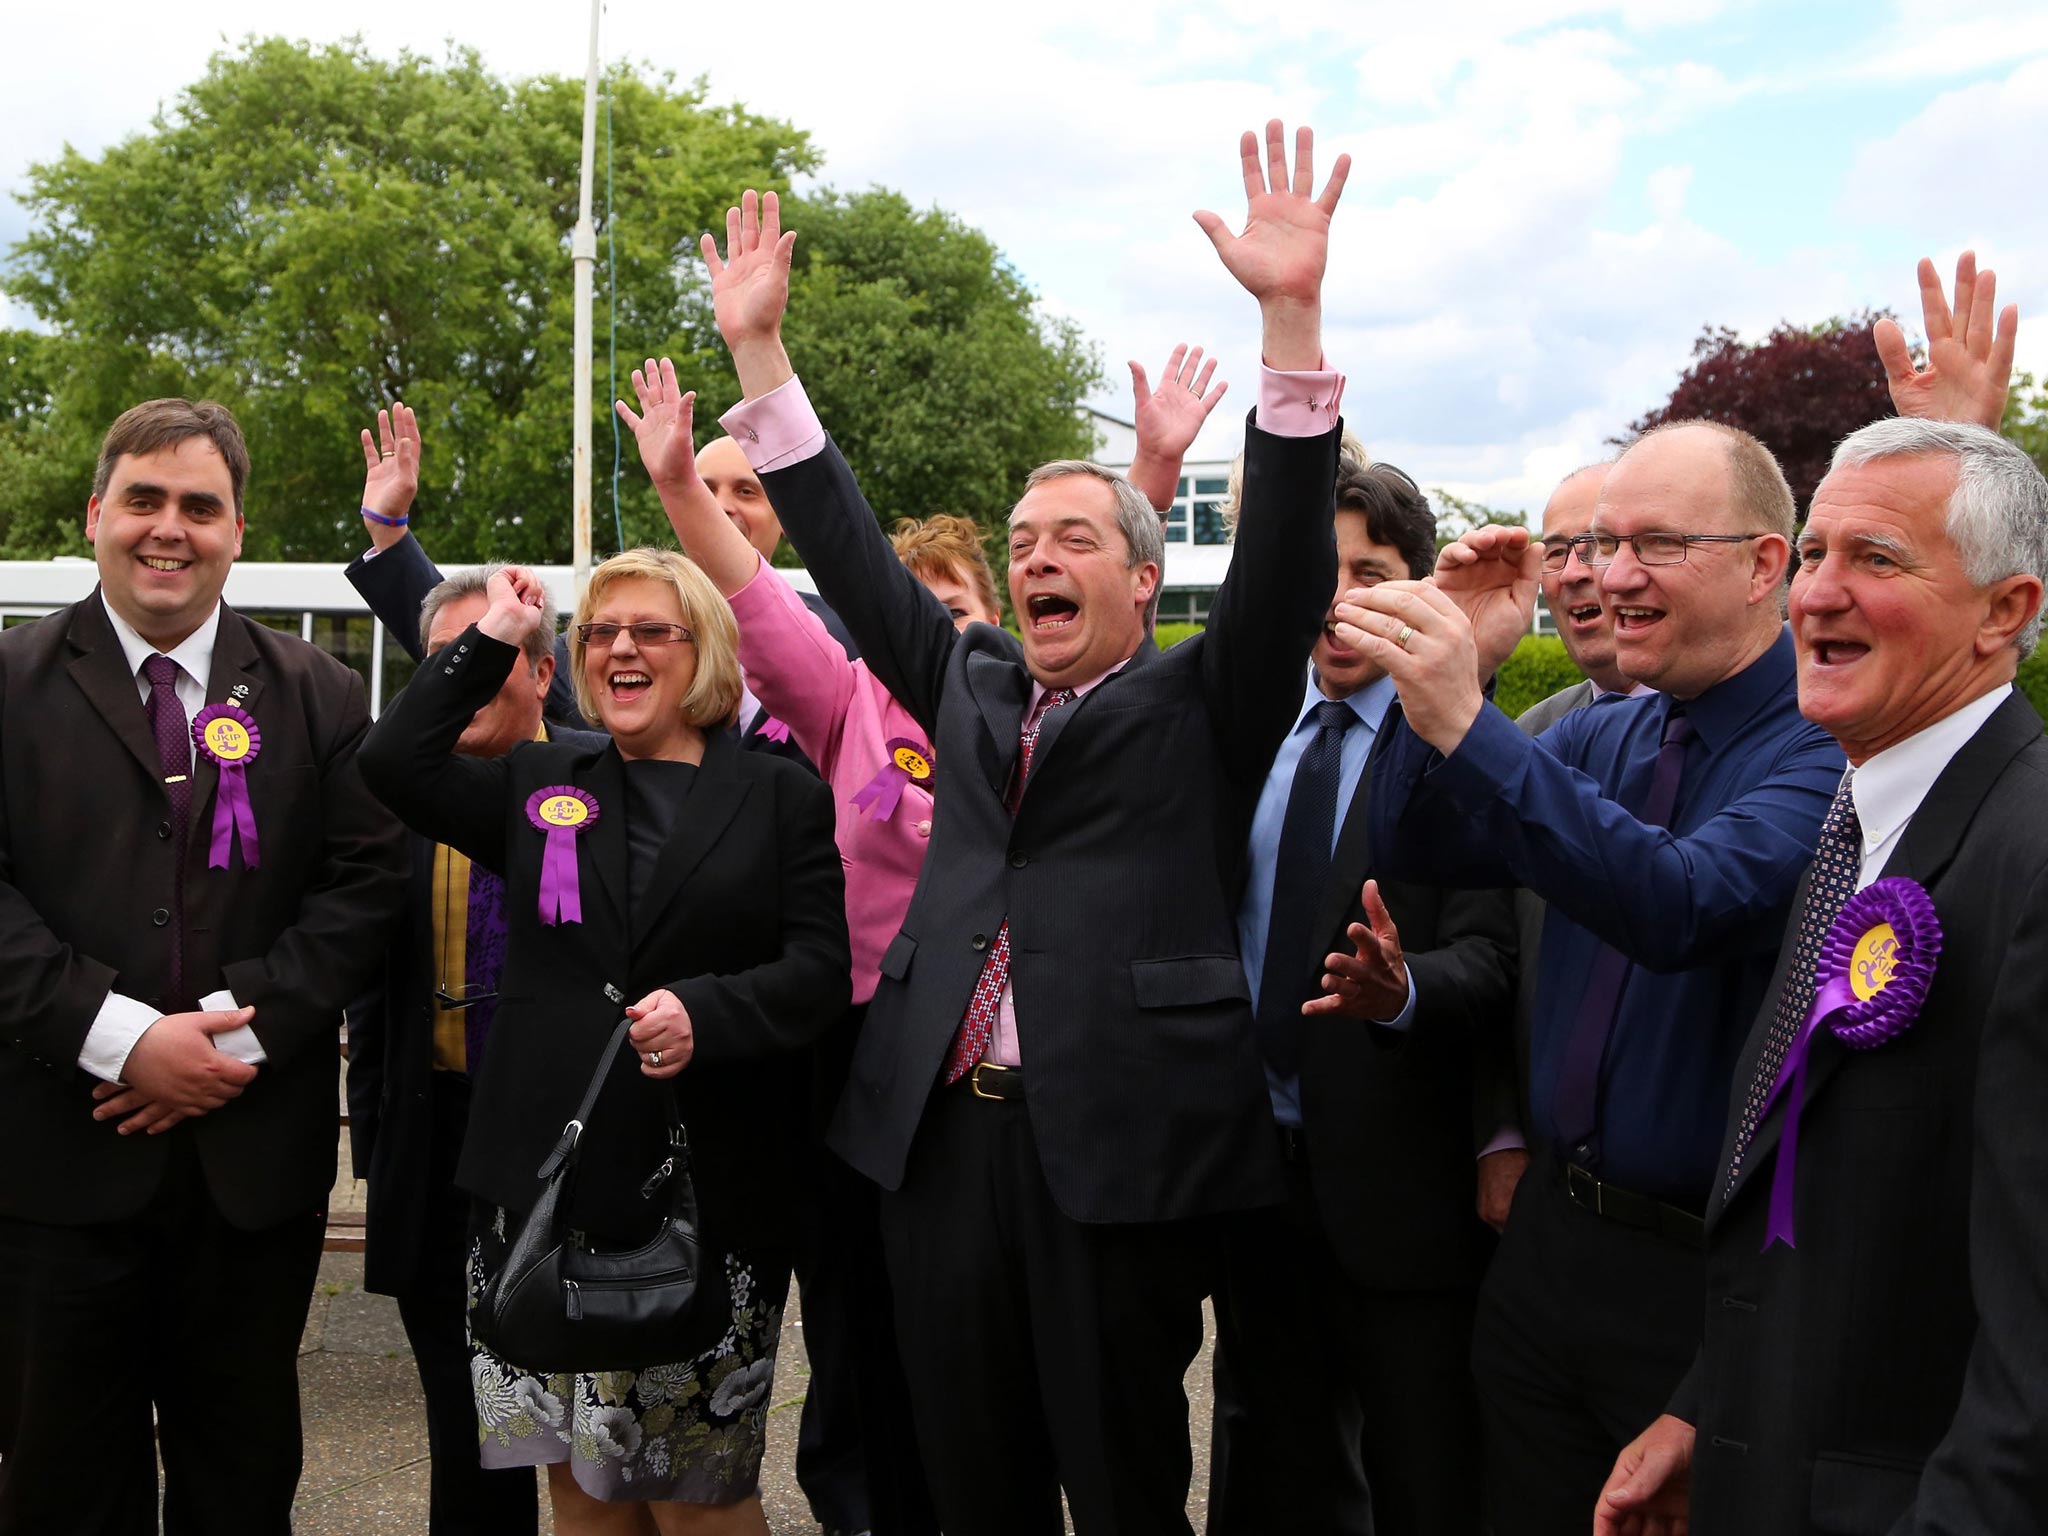 Ukip party leader Nigel Farage with his new councilors during a visit to Basildon, Essex